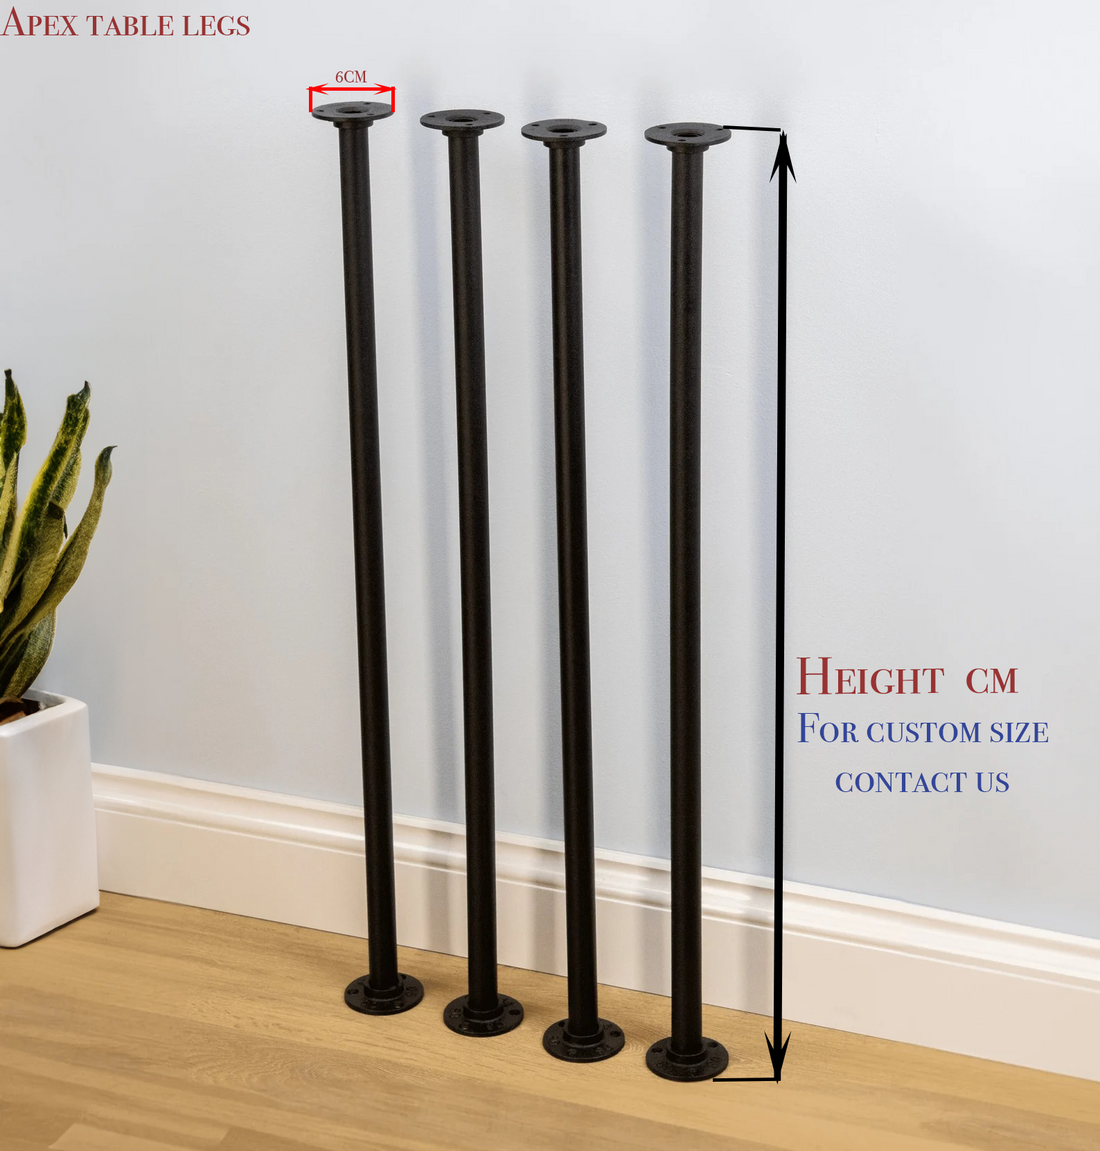 Unique Pipe Table Legs holding various furniture pieces, showcasing their industrial and versatile design